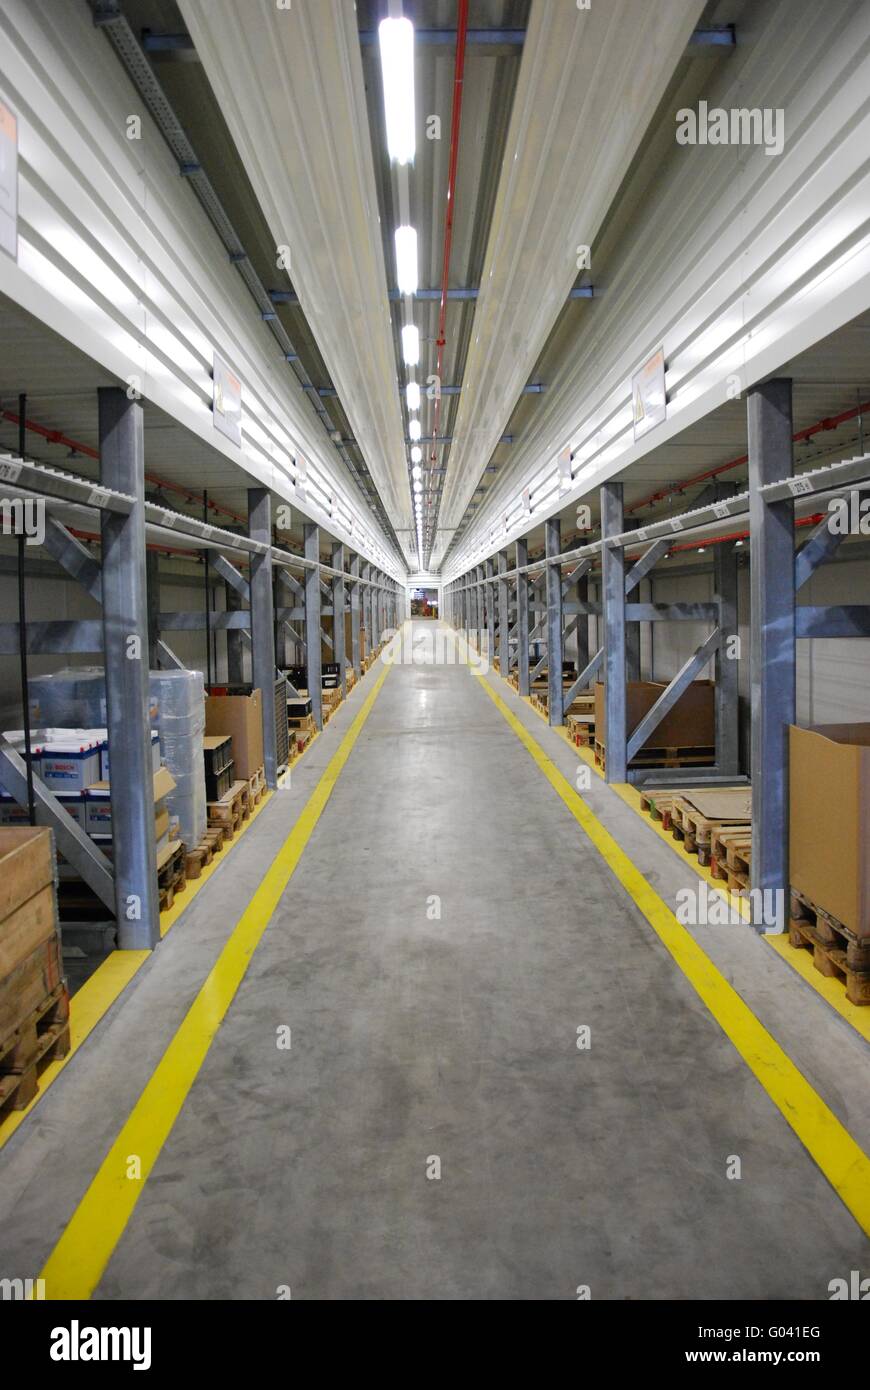 shelves in the warehouse: logistics Stock Photo